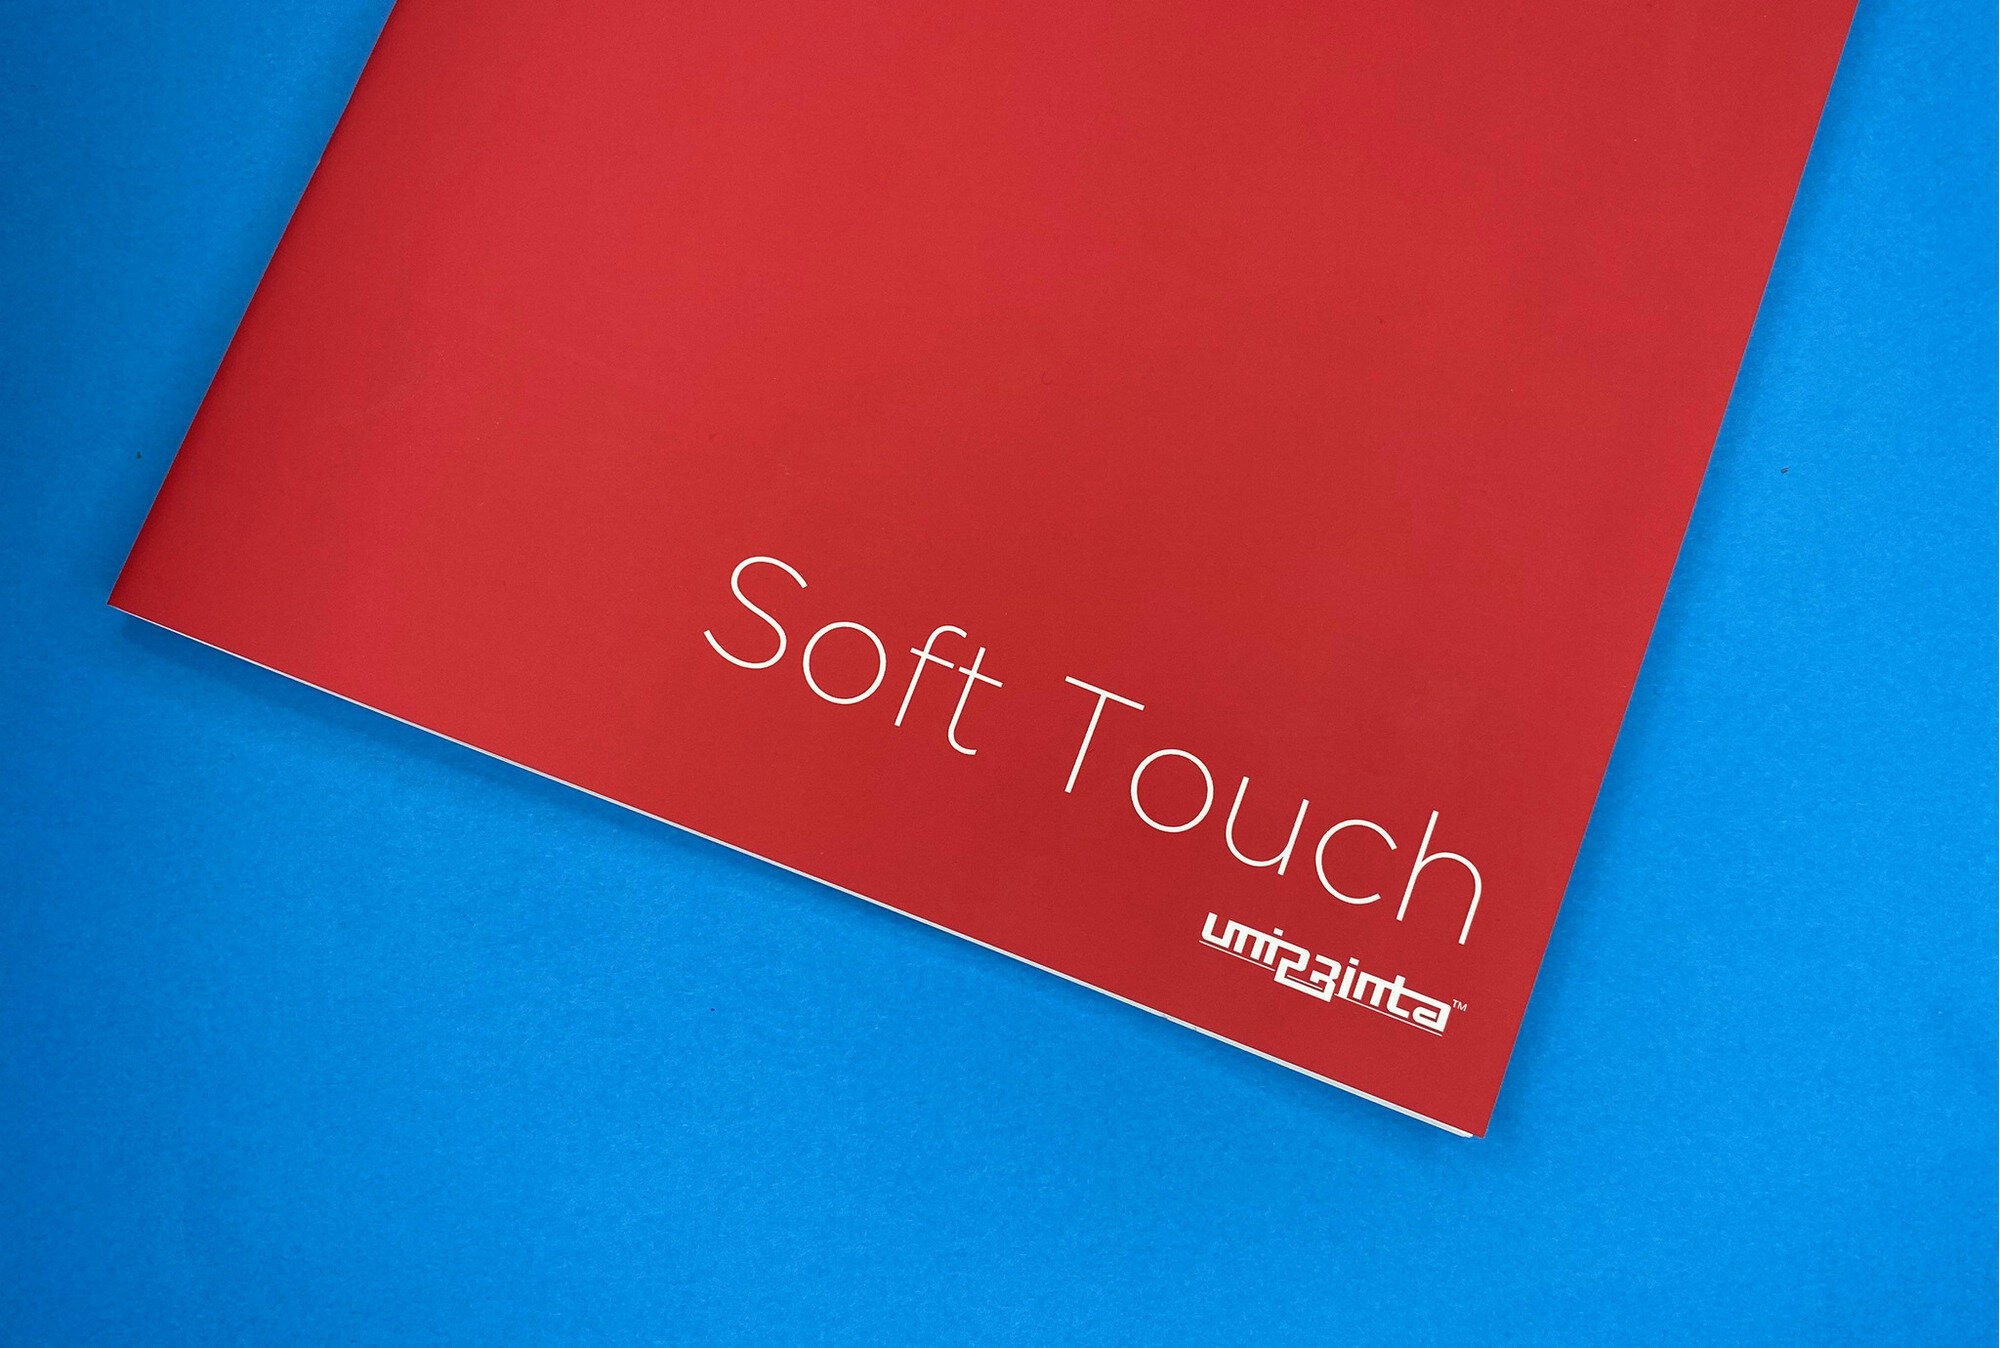 Soft-touch